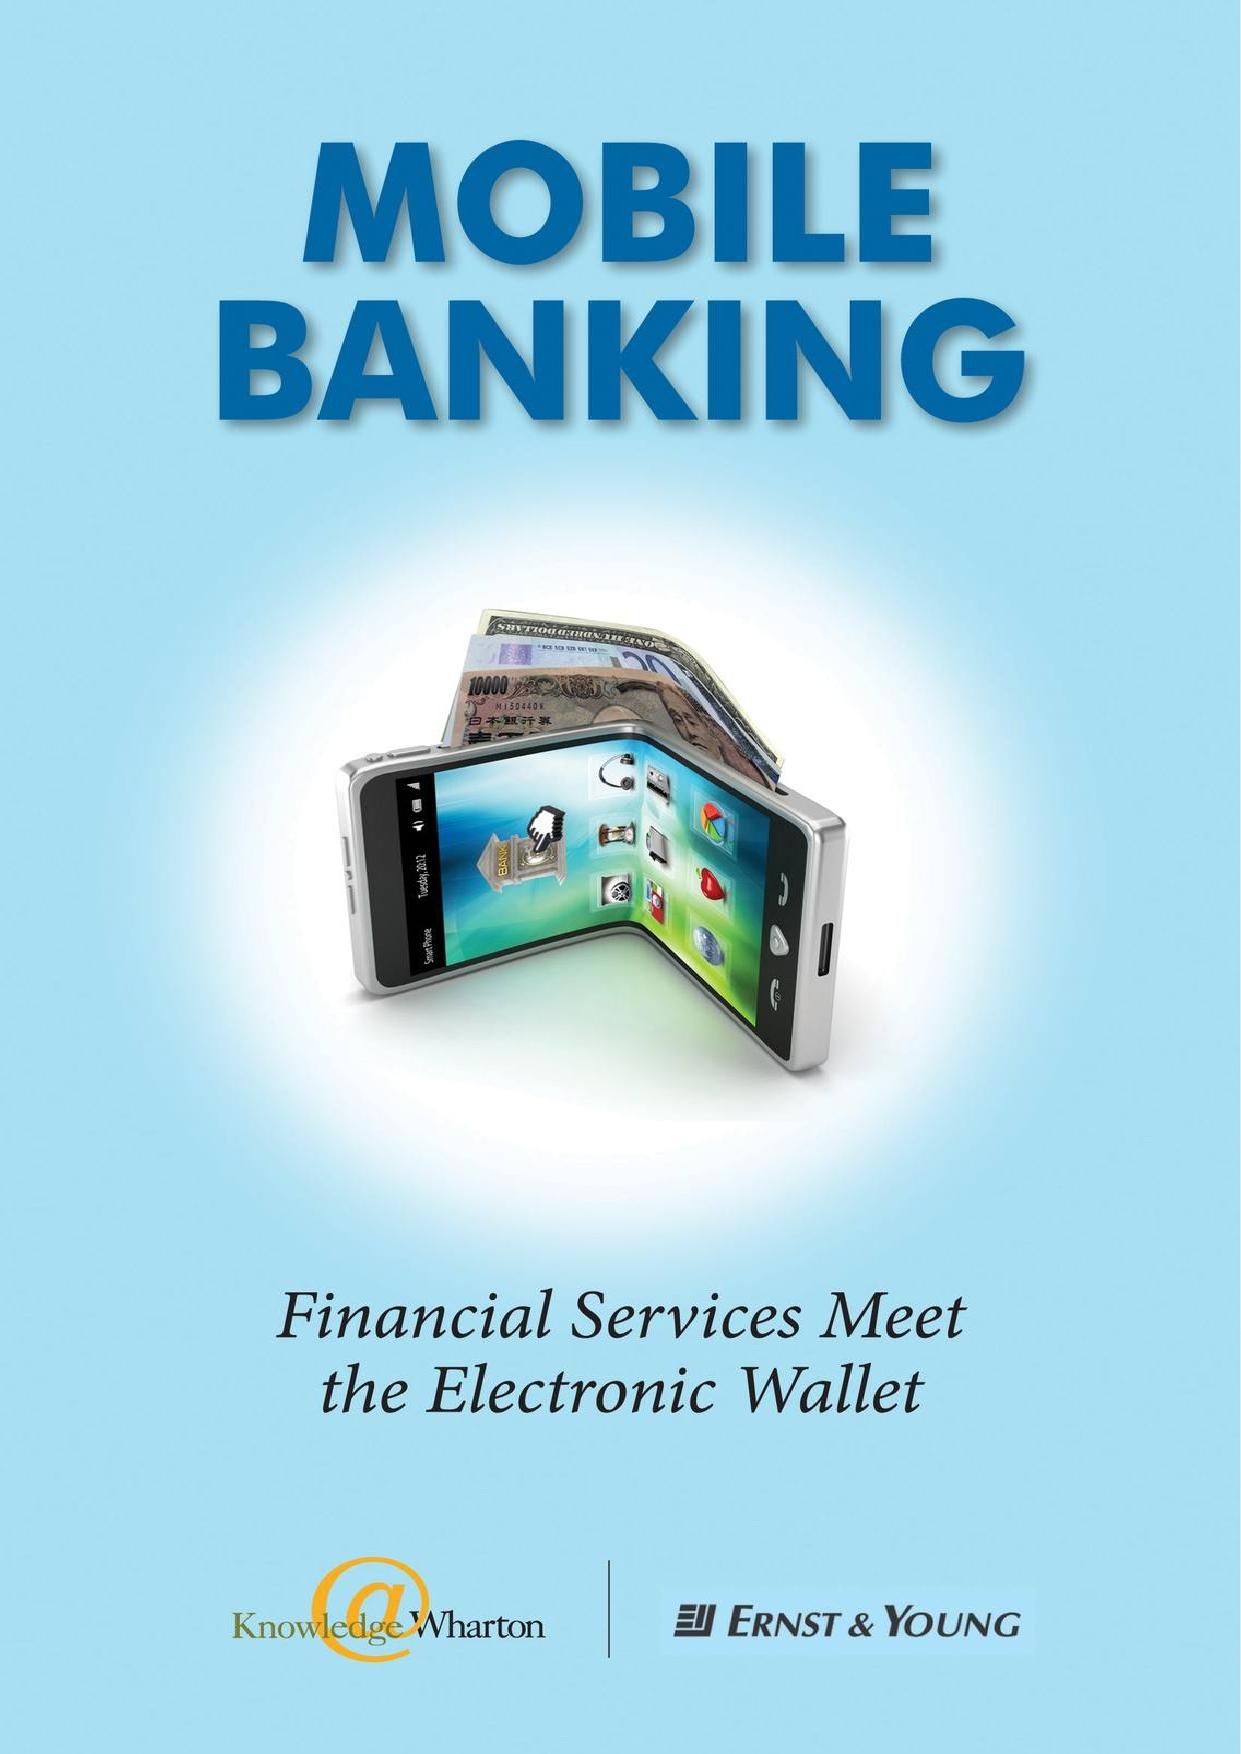 Mobile Banking: Financial Services Meet the Electronic Wallet